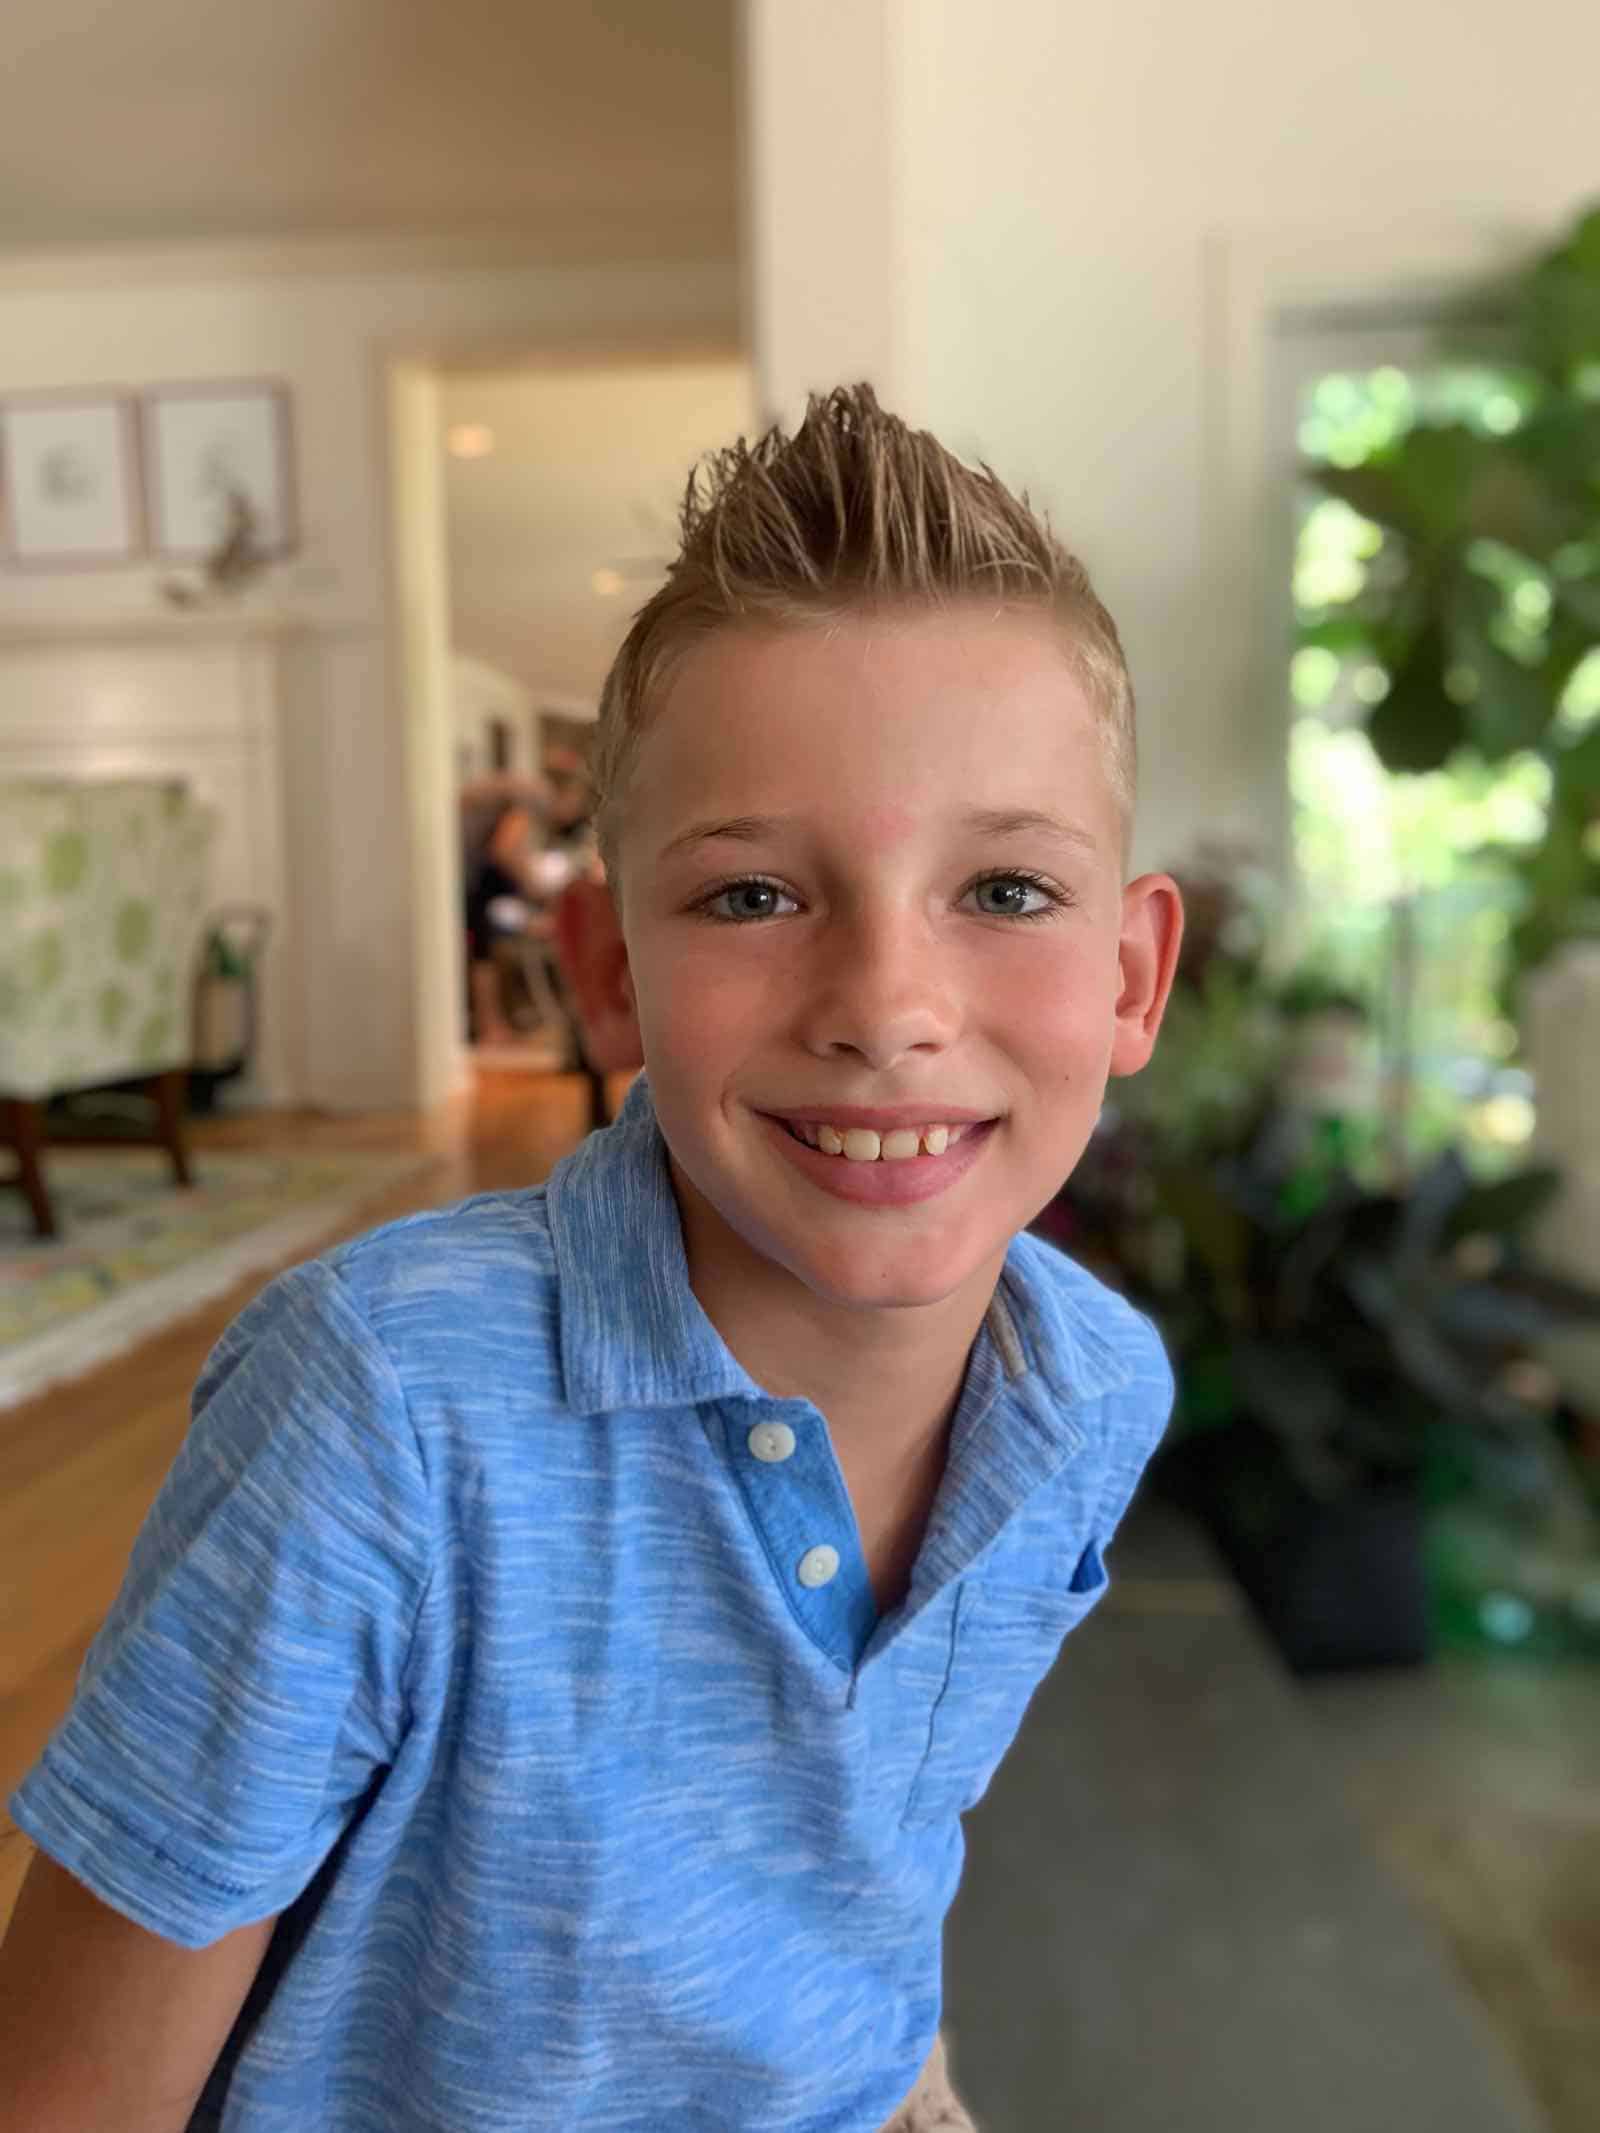 son with new haircut